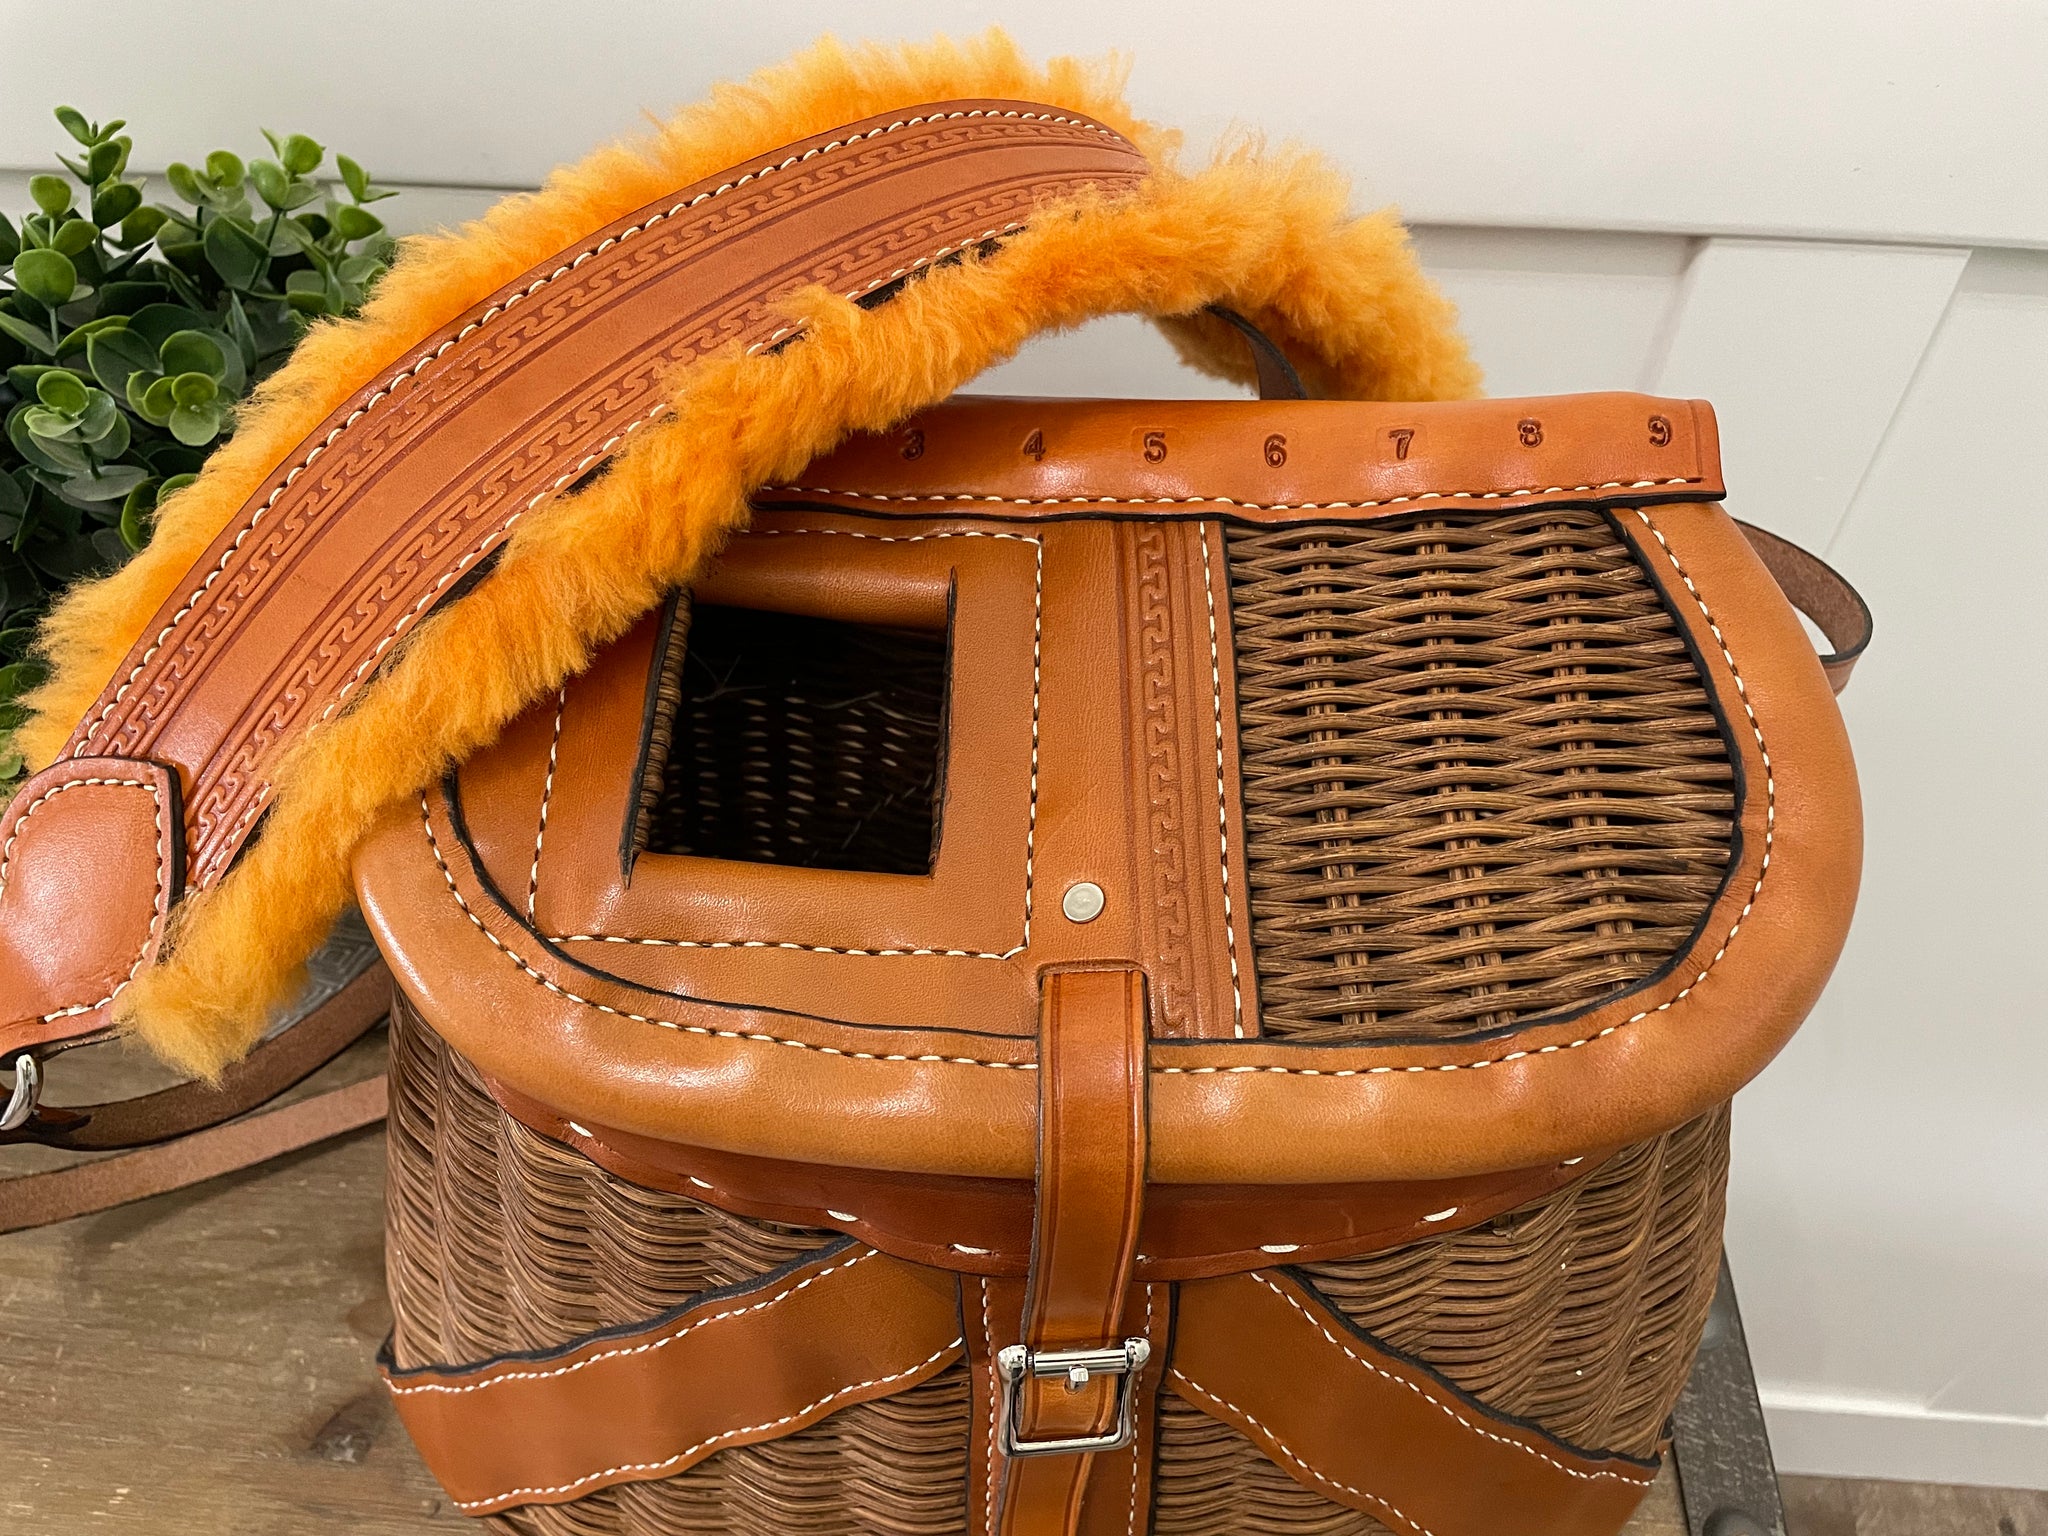 Restored Vintage Wicker Fishing Creel – Lost River Leather